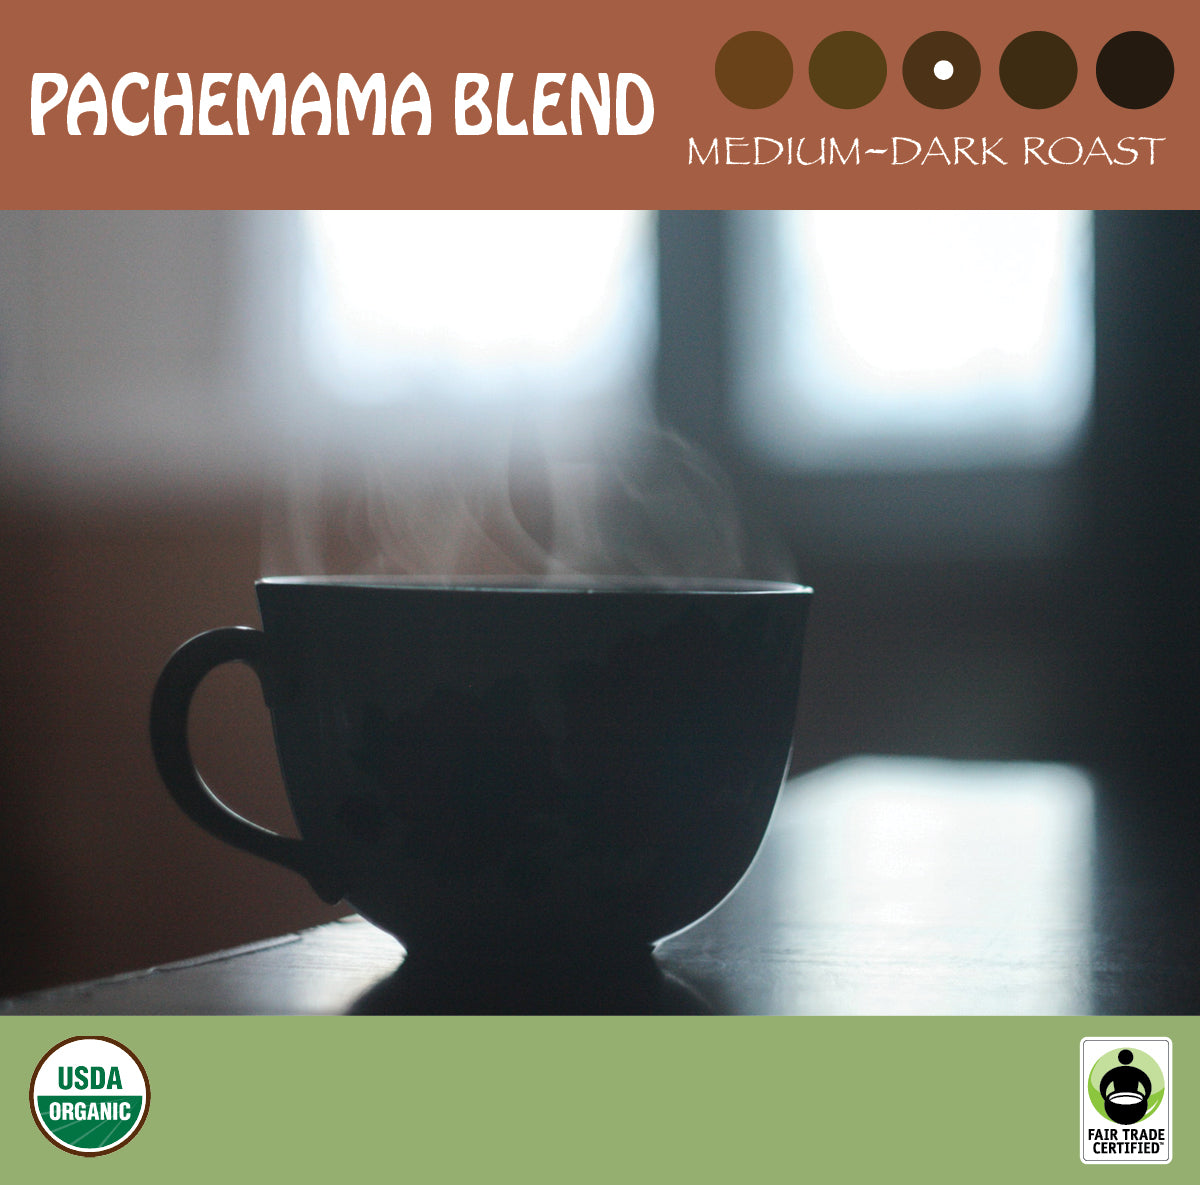 A black mug of steaming coffee on a table against a blurred background. Representing Signature's medium-dark Pachemama Blend. USDA organic and Fair Trade Certified logos.